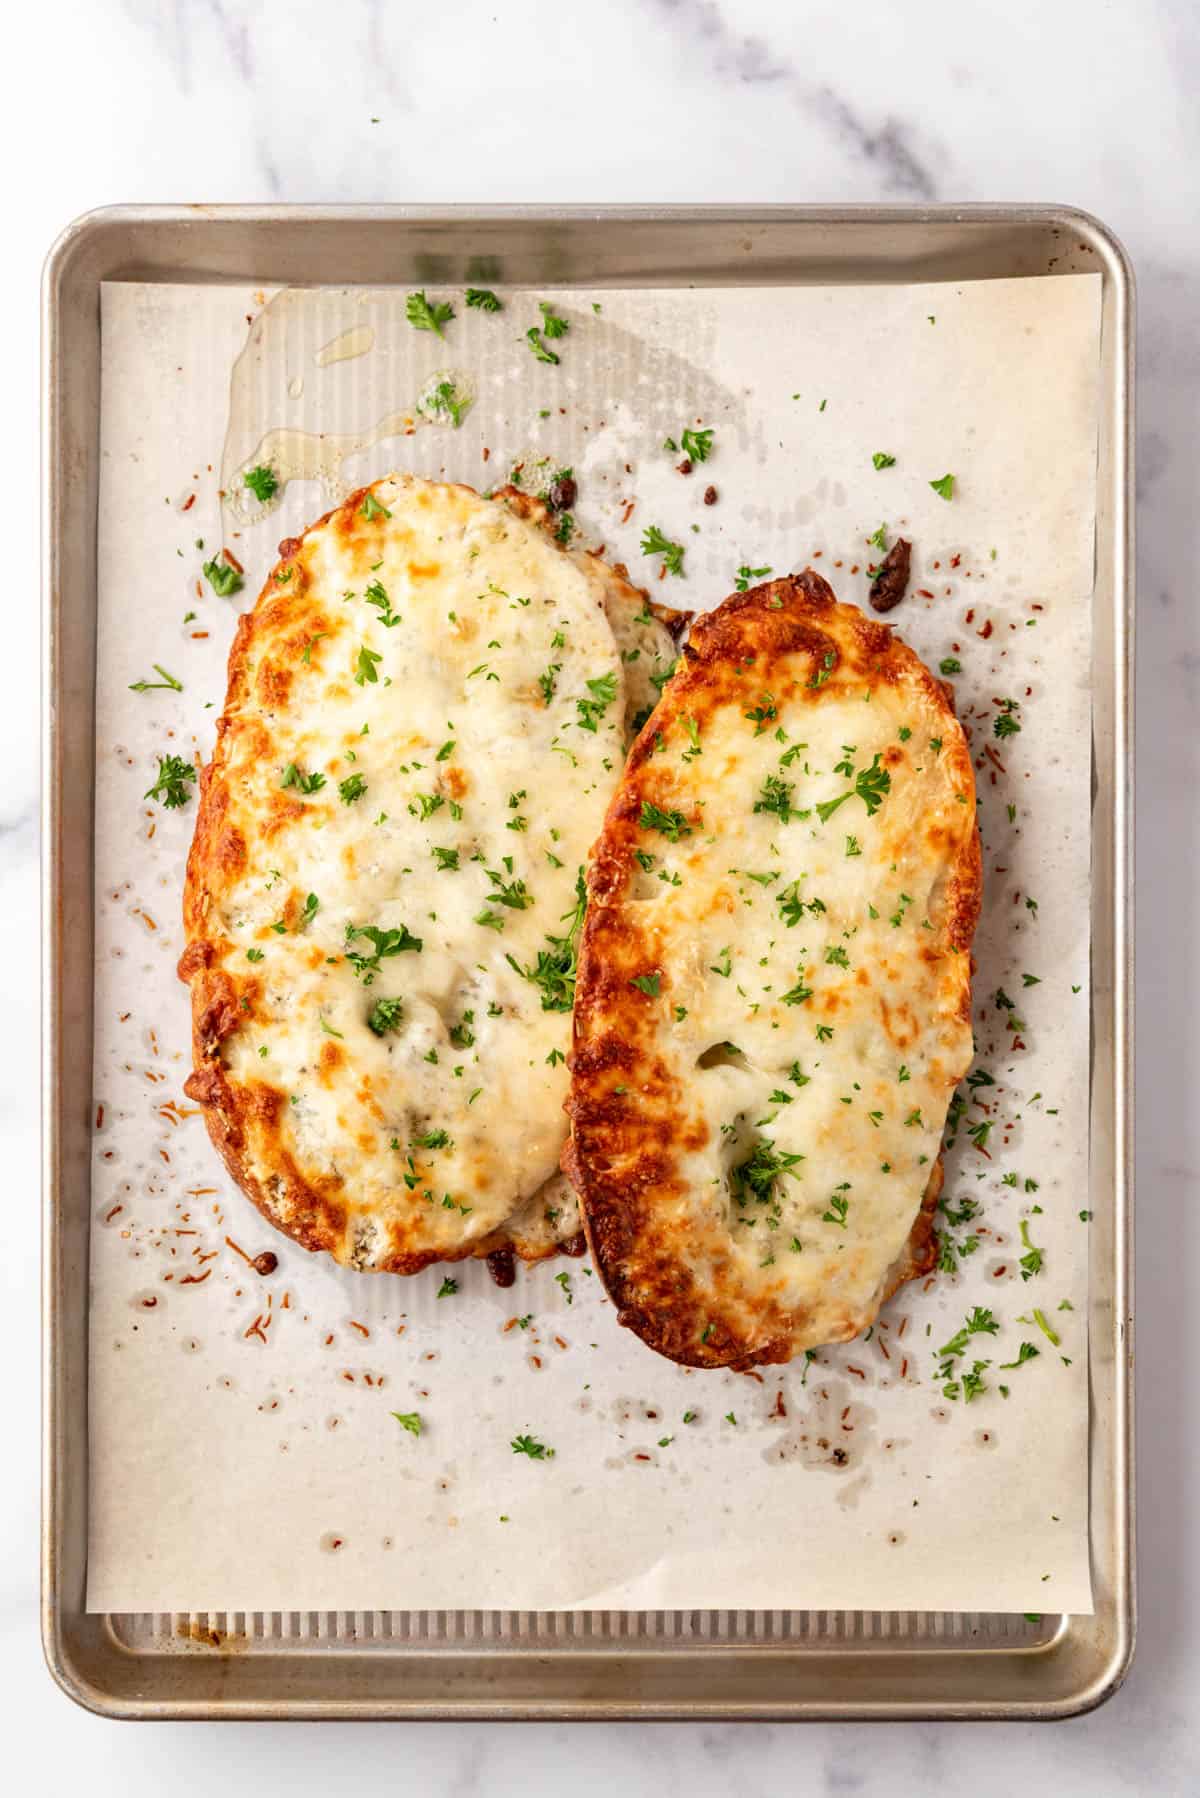 Baked cheesy garlic bread on a baking sheet lined with parchment paper.